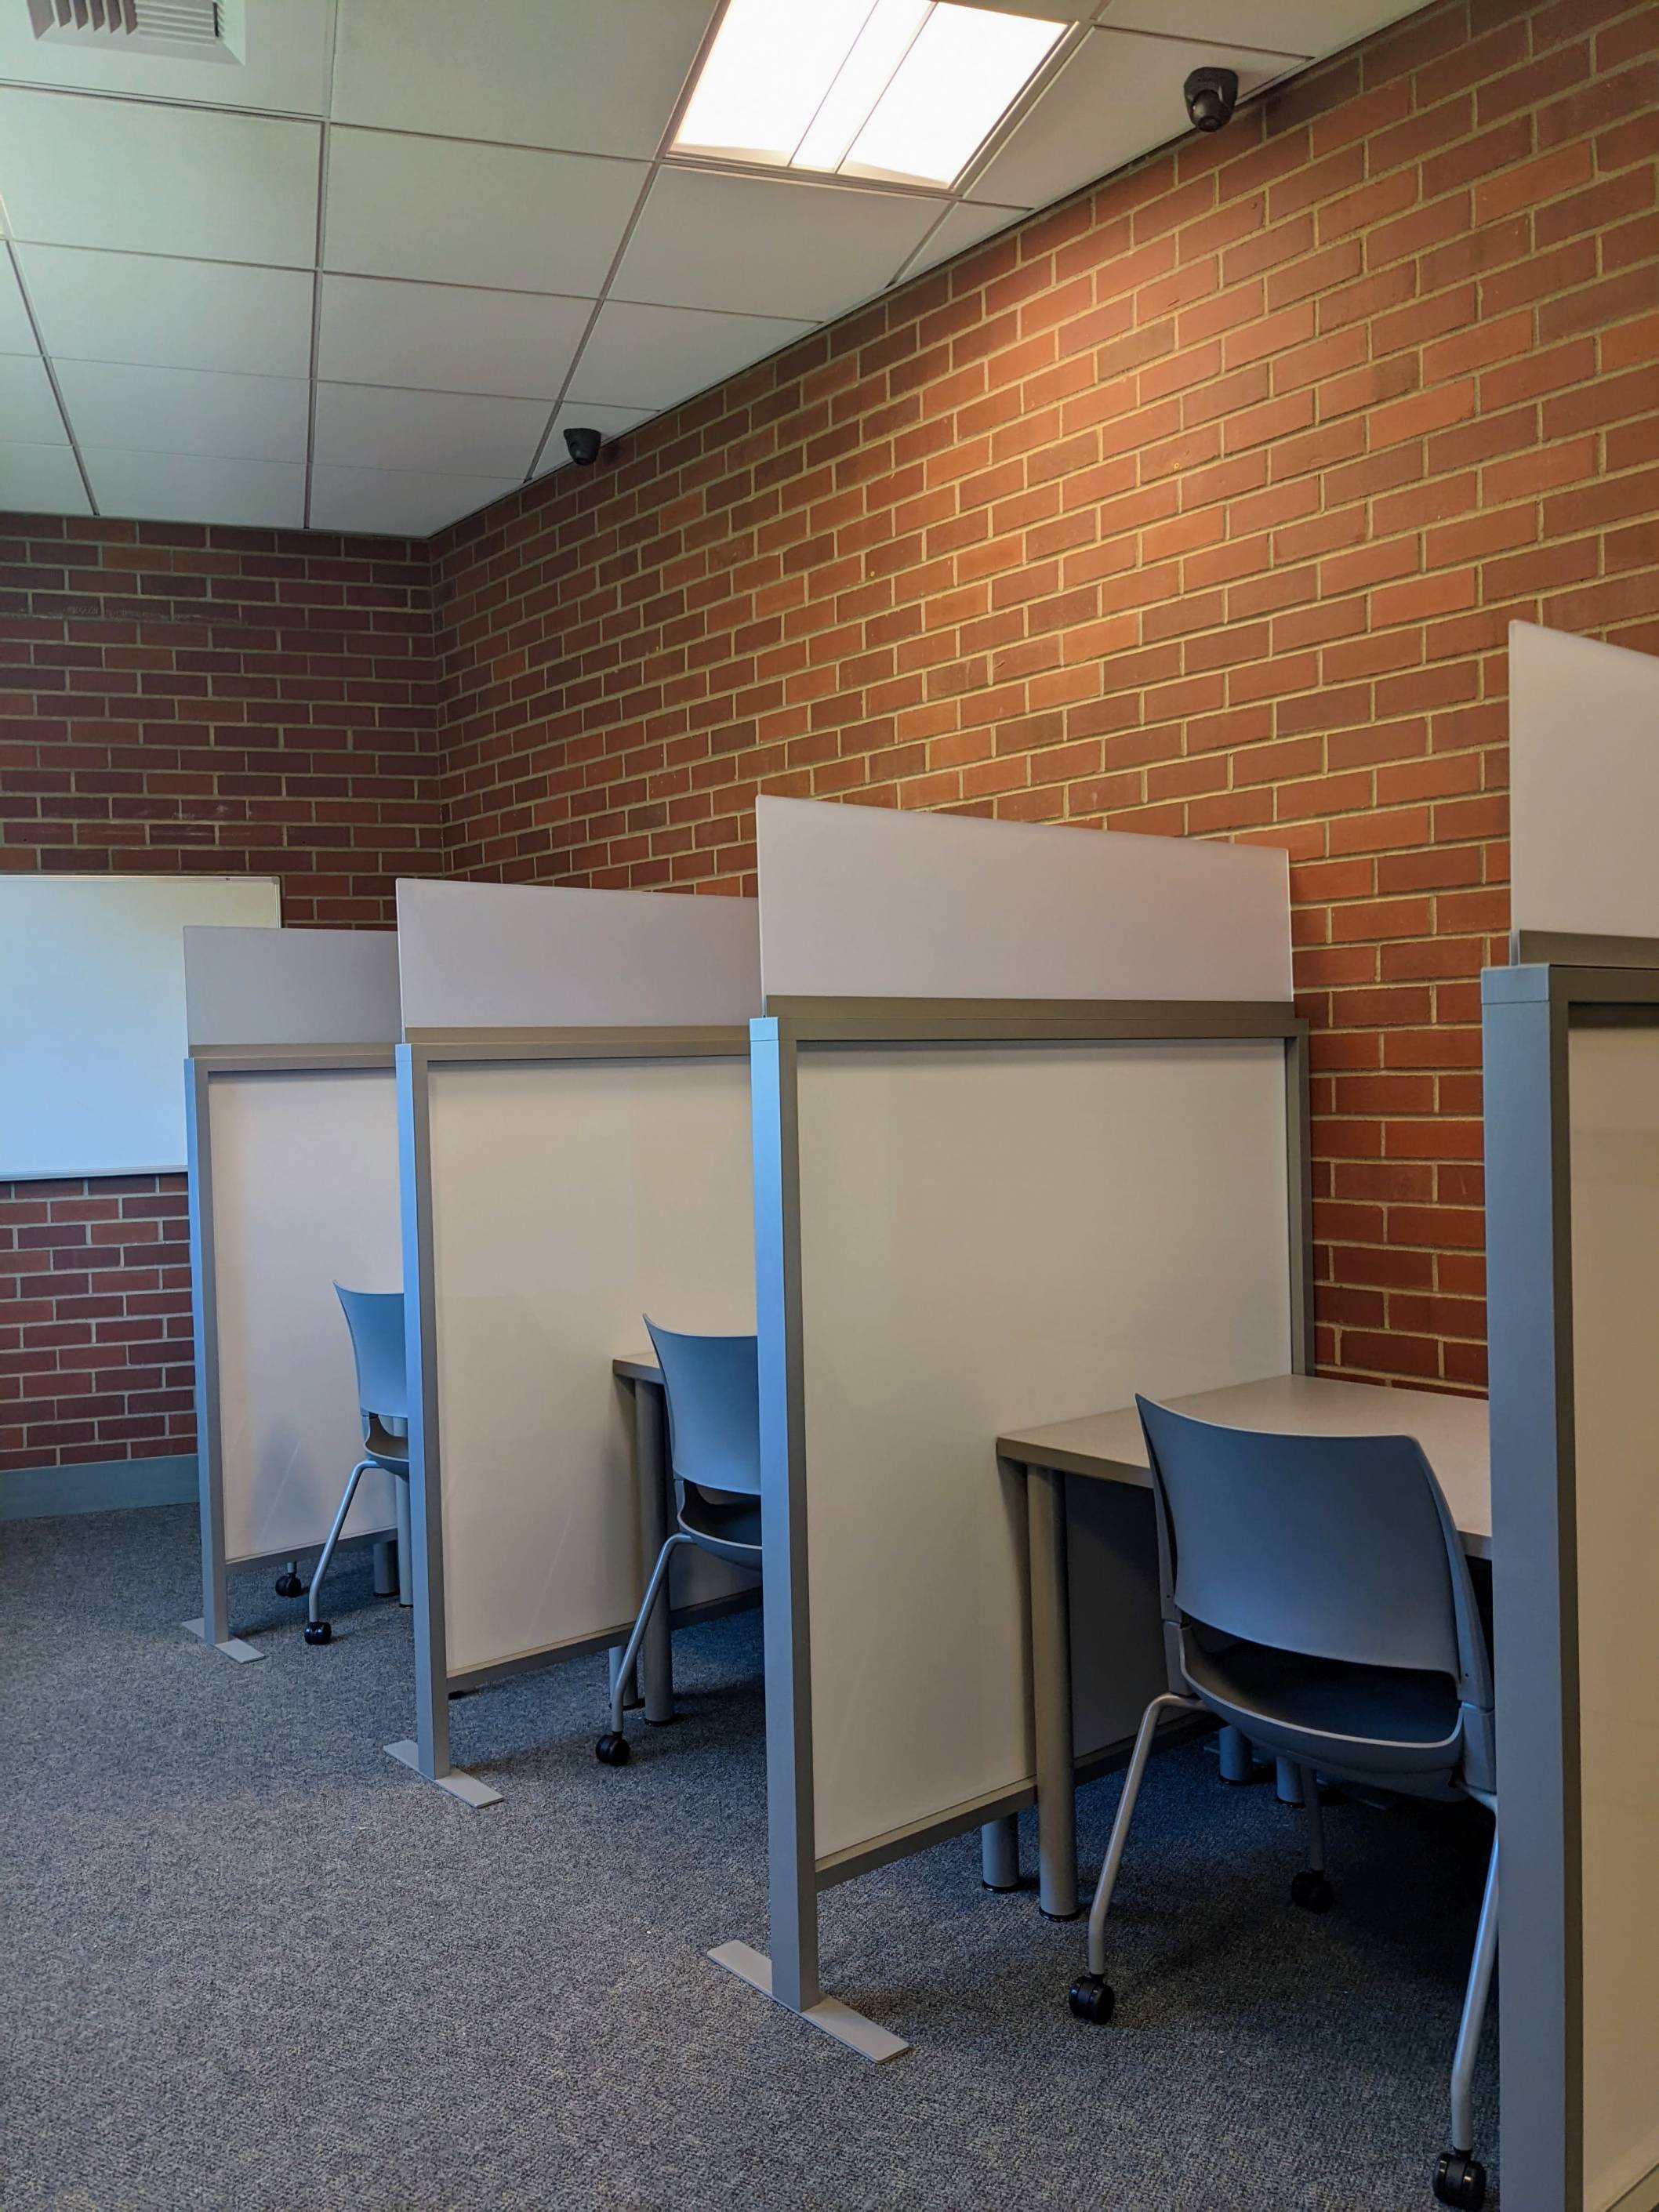 Distraction reduced testing space - 3 cubicles with chairs